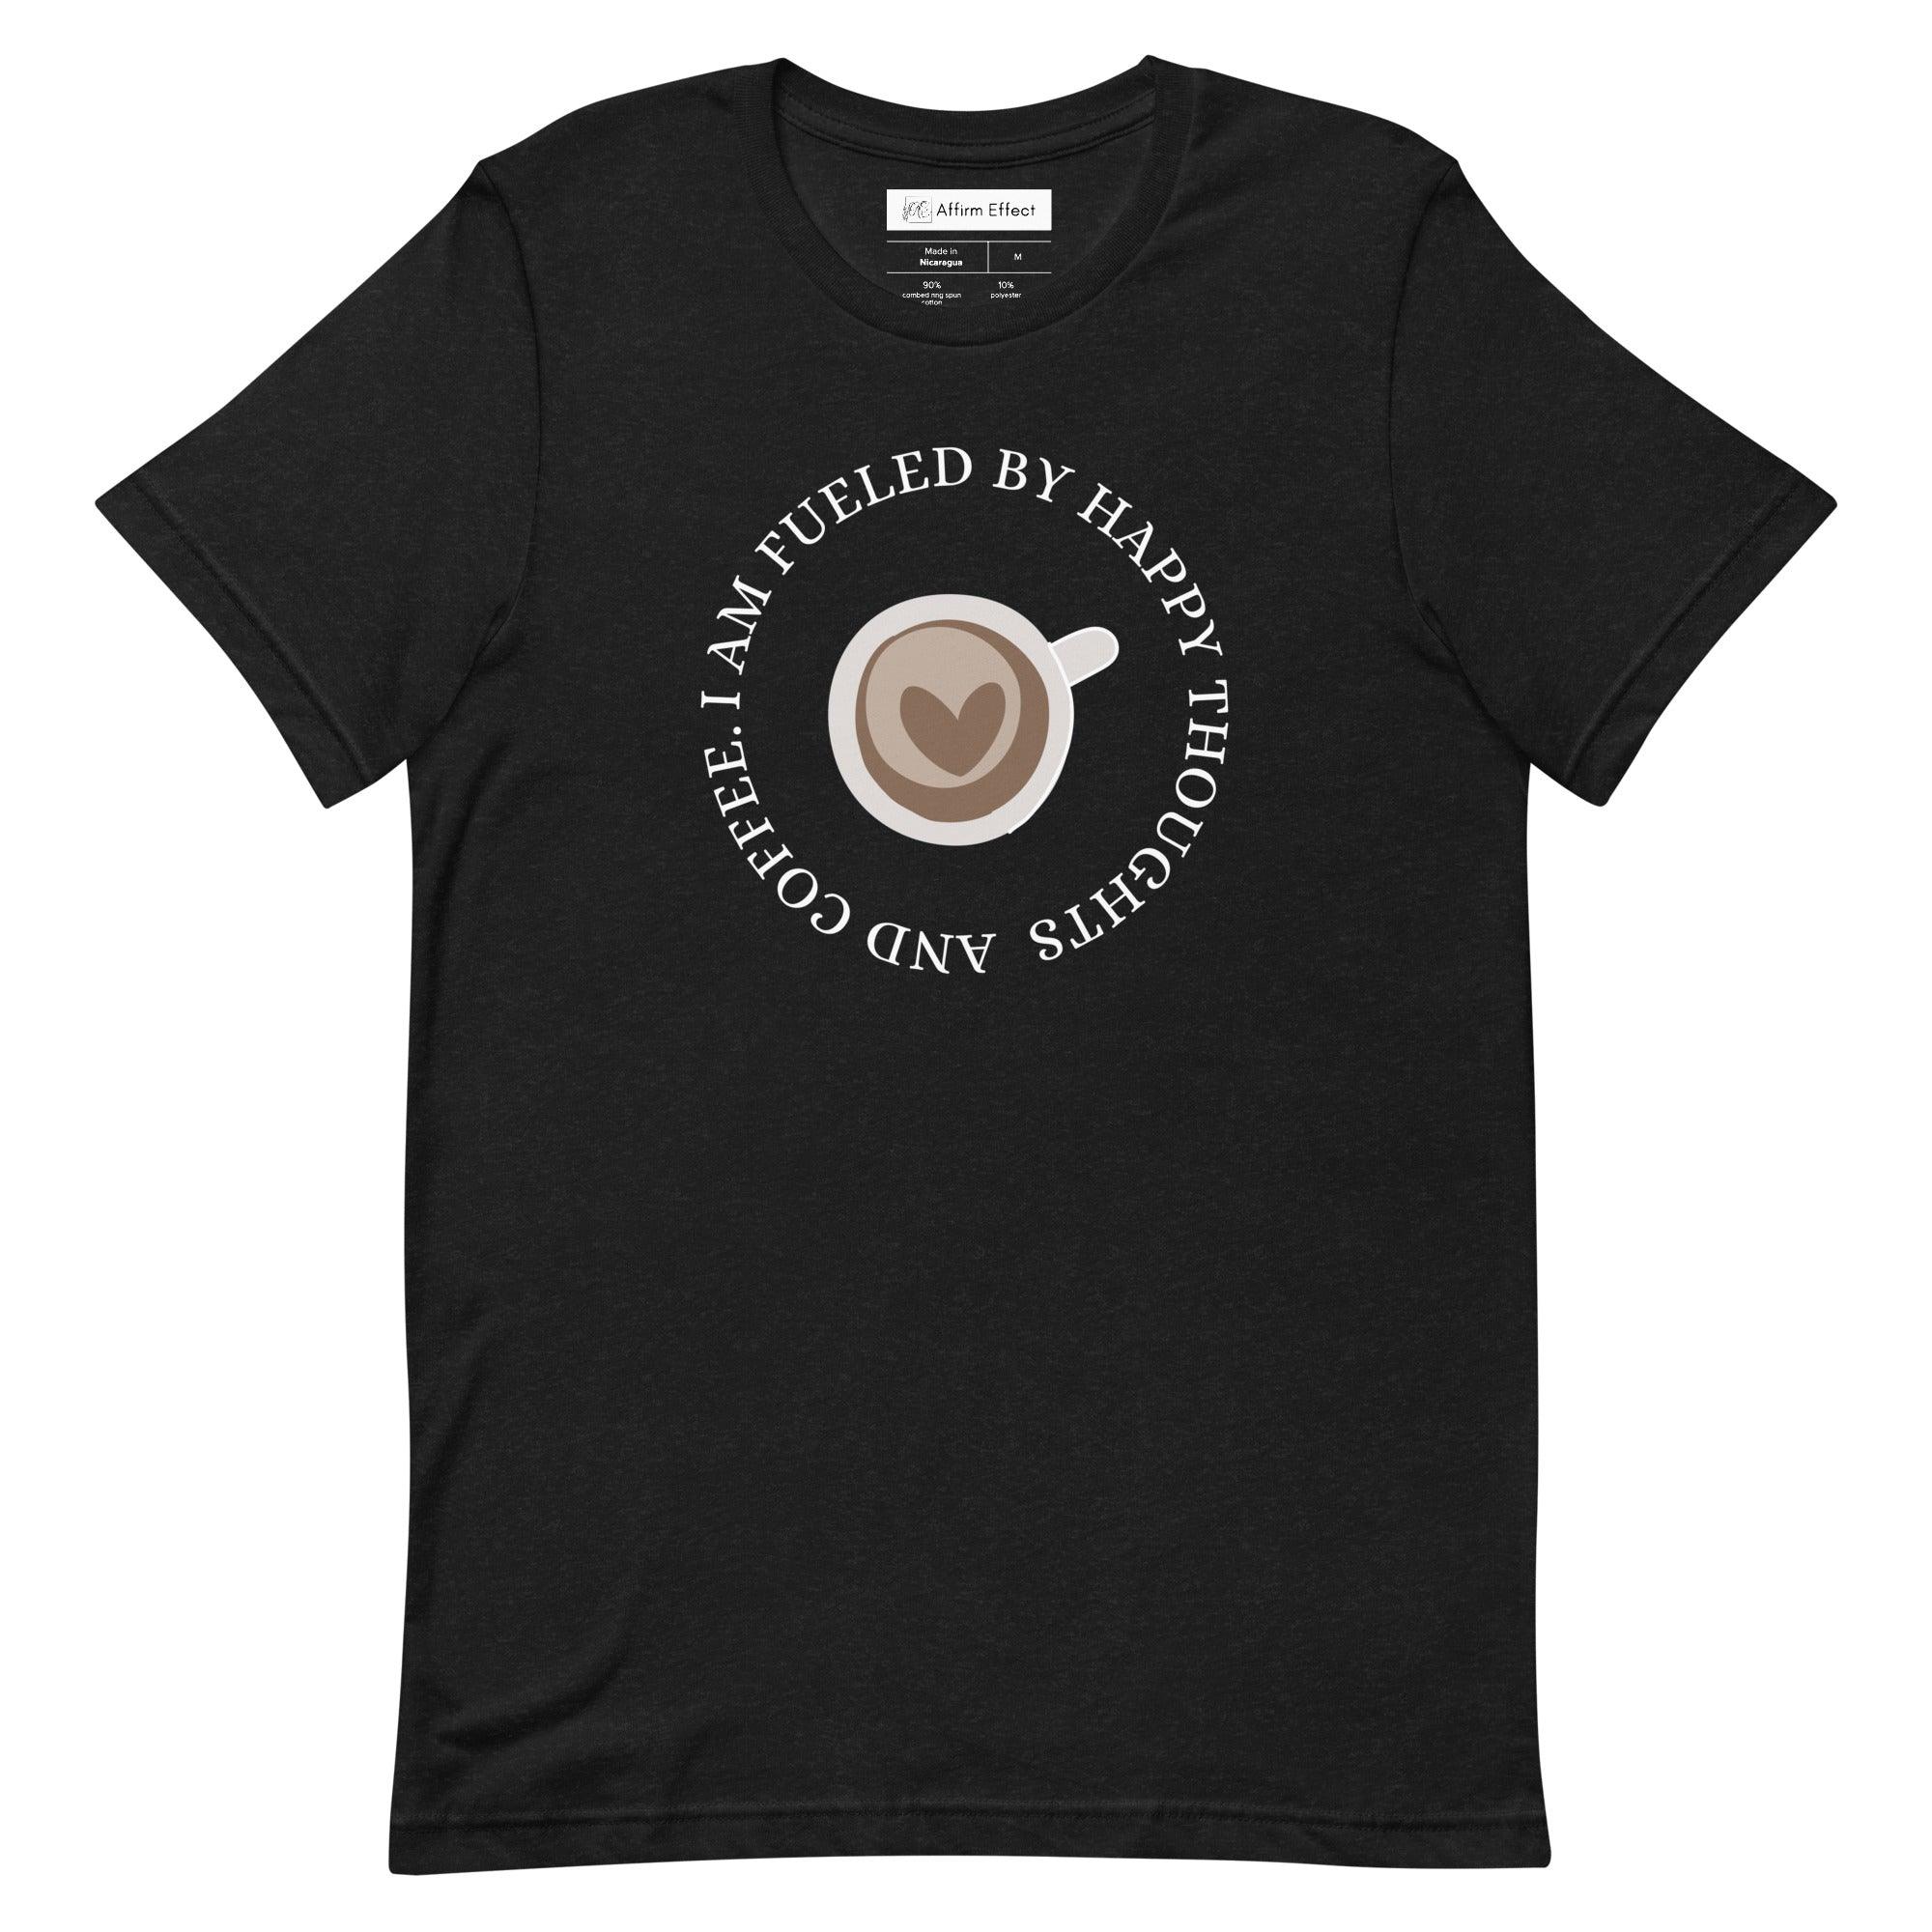 Happy Thoughts and Coffee Short-Sleeve Unisex T-Shirt | Positive Affirmation Tee - Affirm Effect